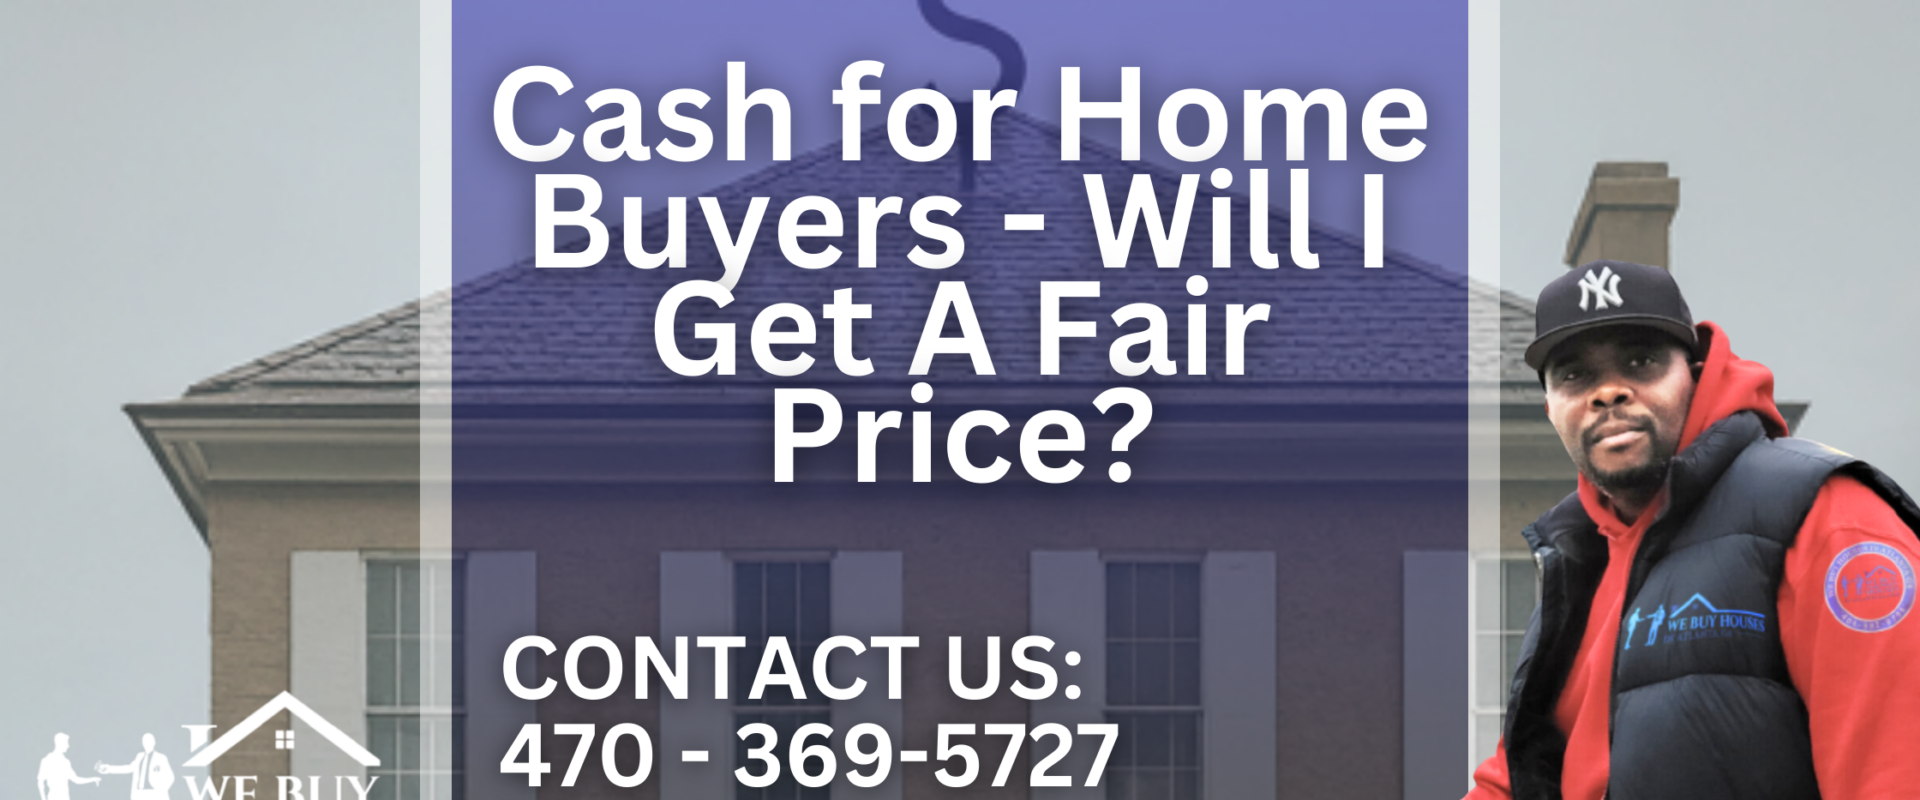 Cash for Home Buyers - Will I Get A Fair Price